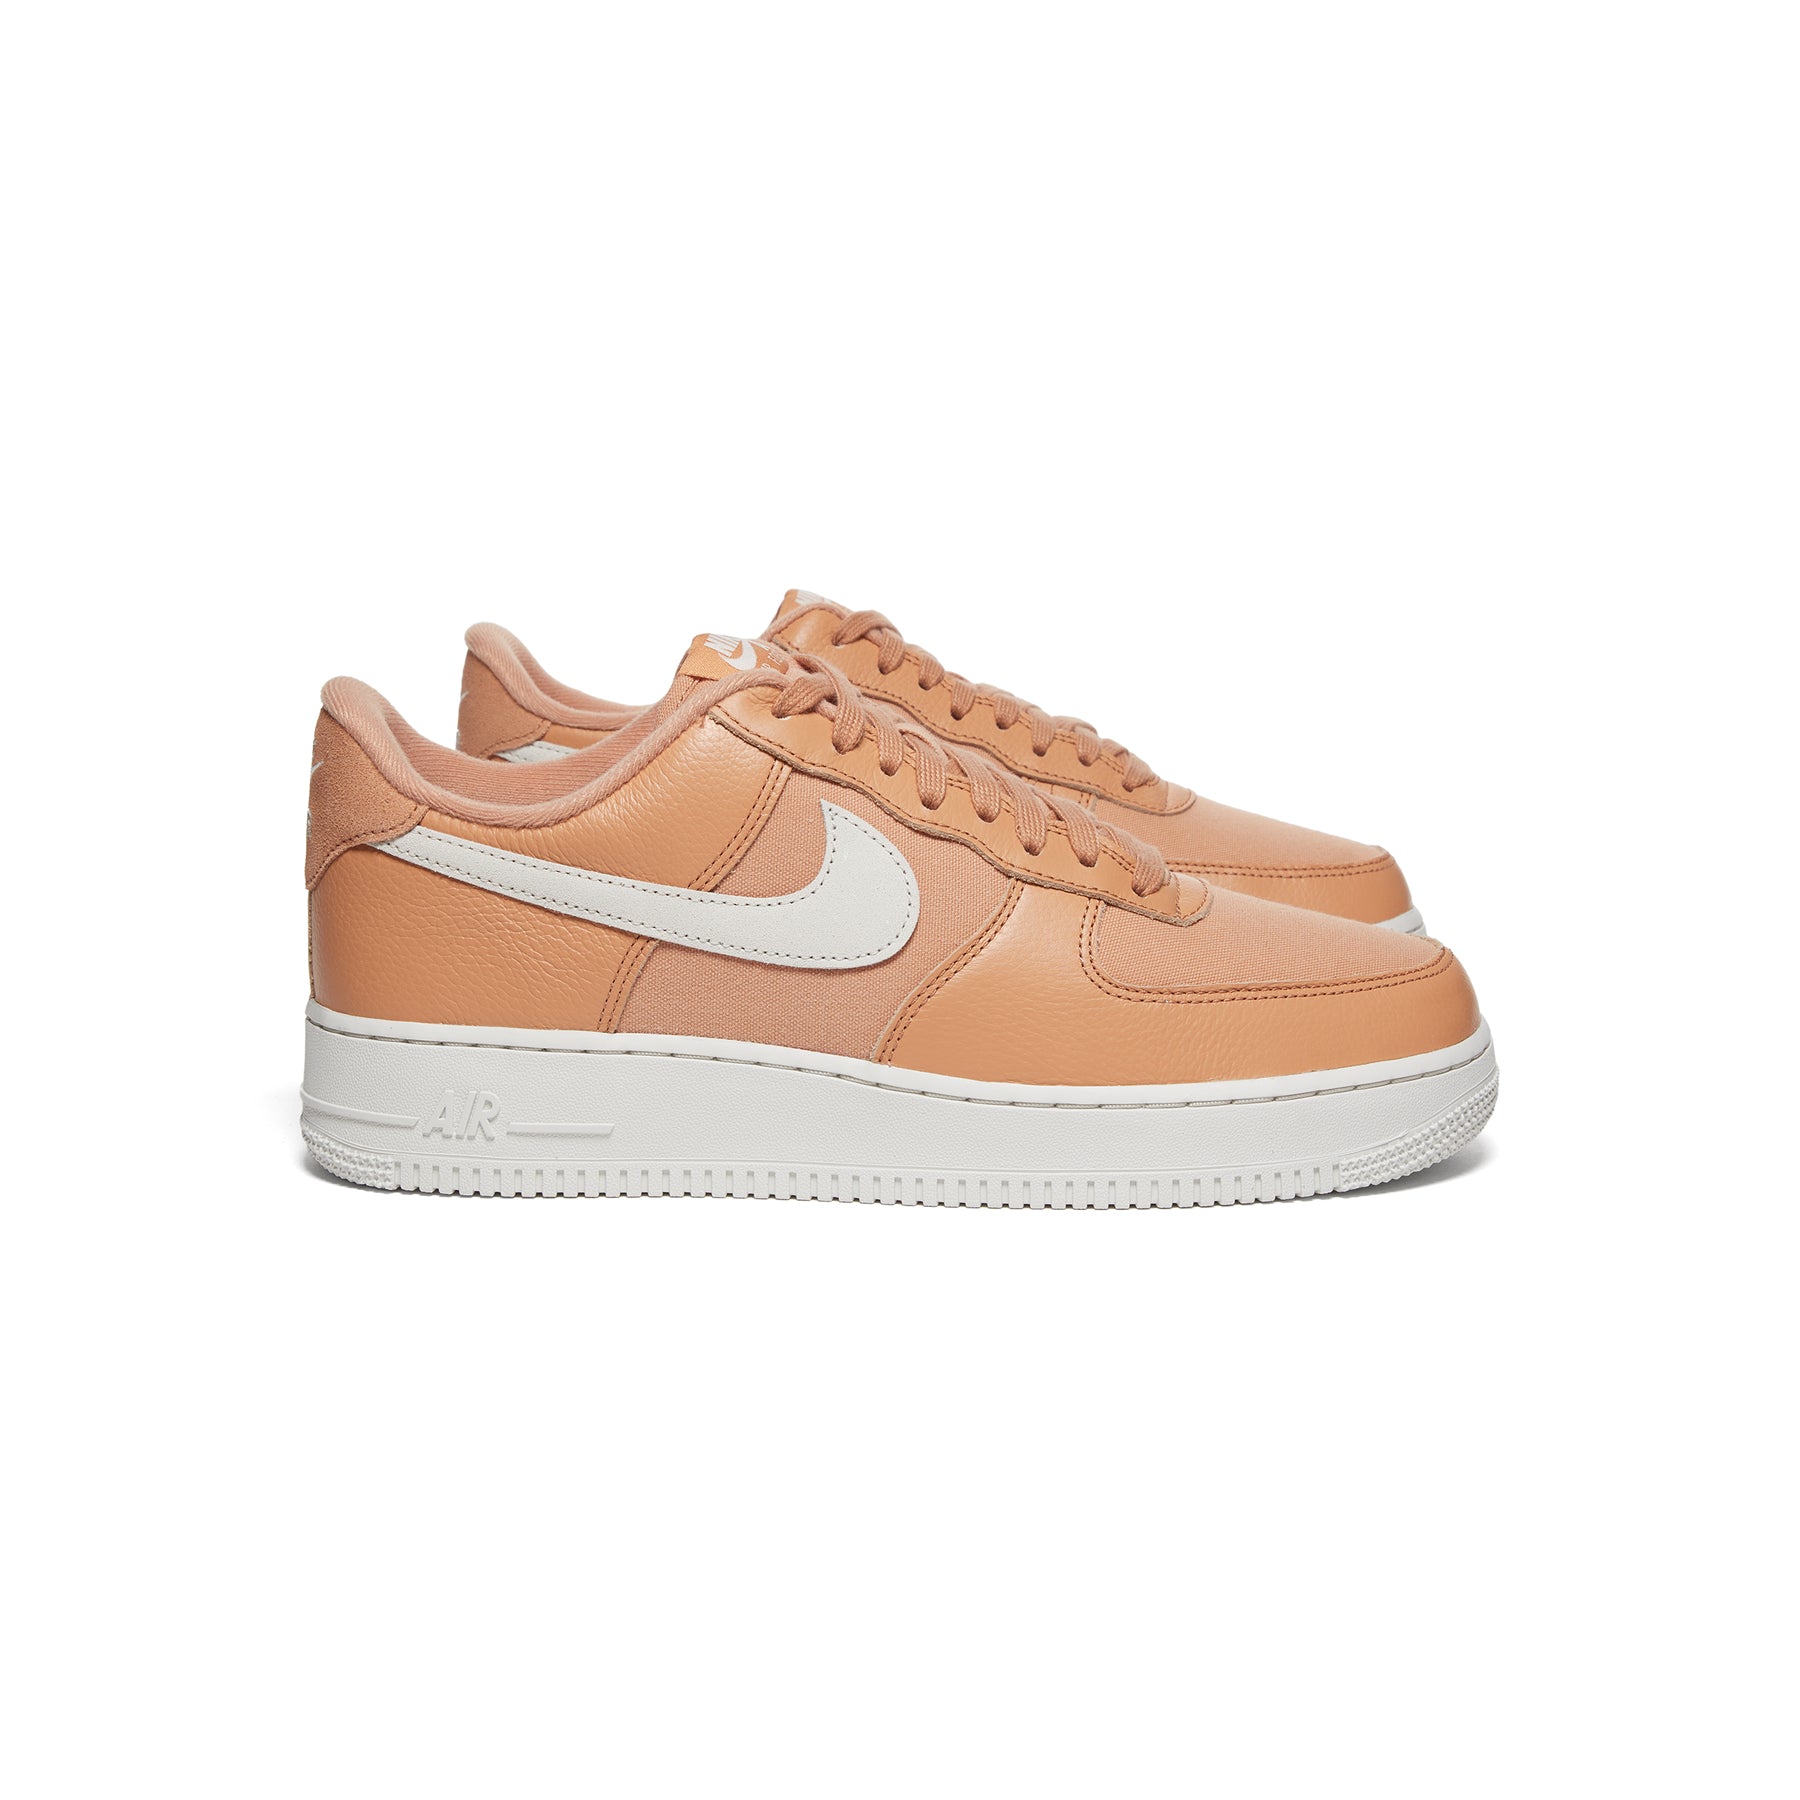 Nike Air Force 1 07 LX AF1 Amber Brown Men Casual Shoes Sneakers